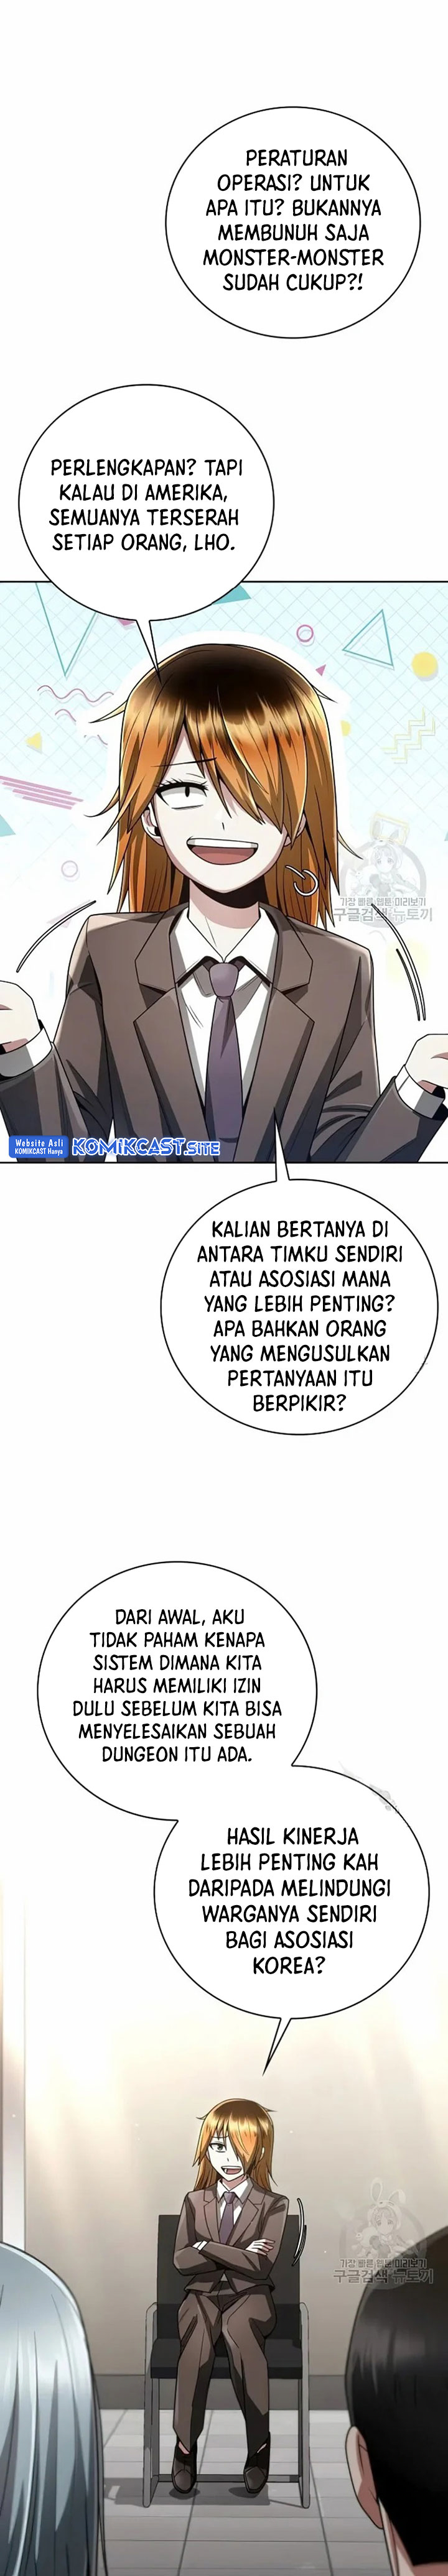 Dilarang COPAS - situs resmi www.mangacanblog.com - Komik clever cleaning life of the returned genius hunter 029 - chapter 29 30 Indonesia clever cleaning life of the returned genius hunter 029 - chapter 29 Terbaru 7|Baca Manga Komik Indonesia|Mangacan